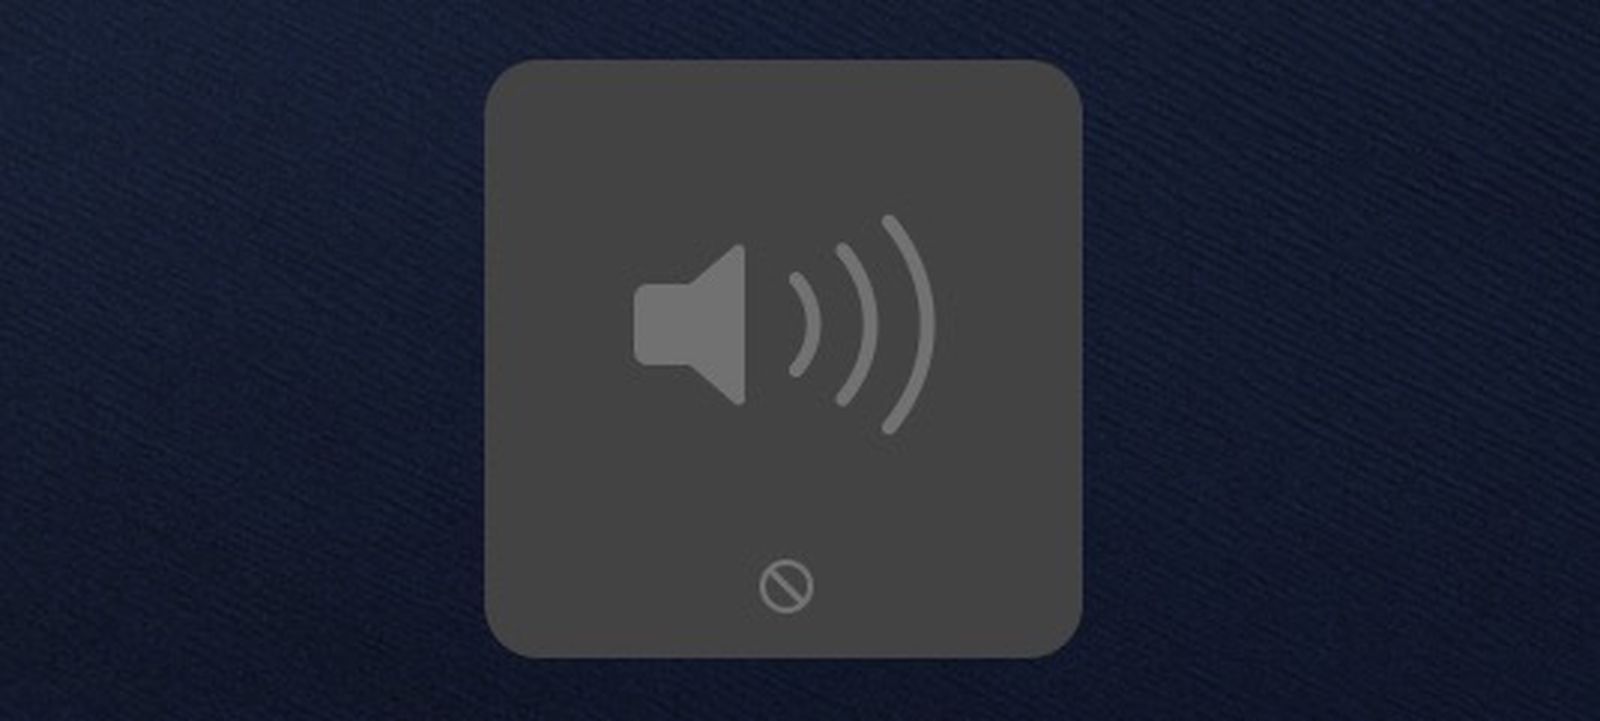 can i change the sound for the messages app on my mac